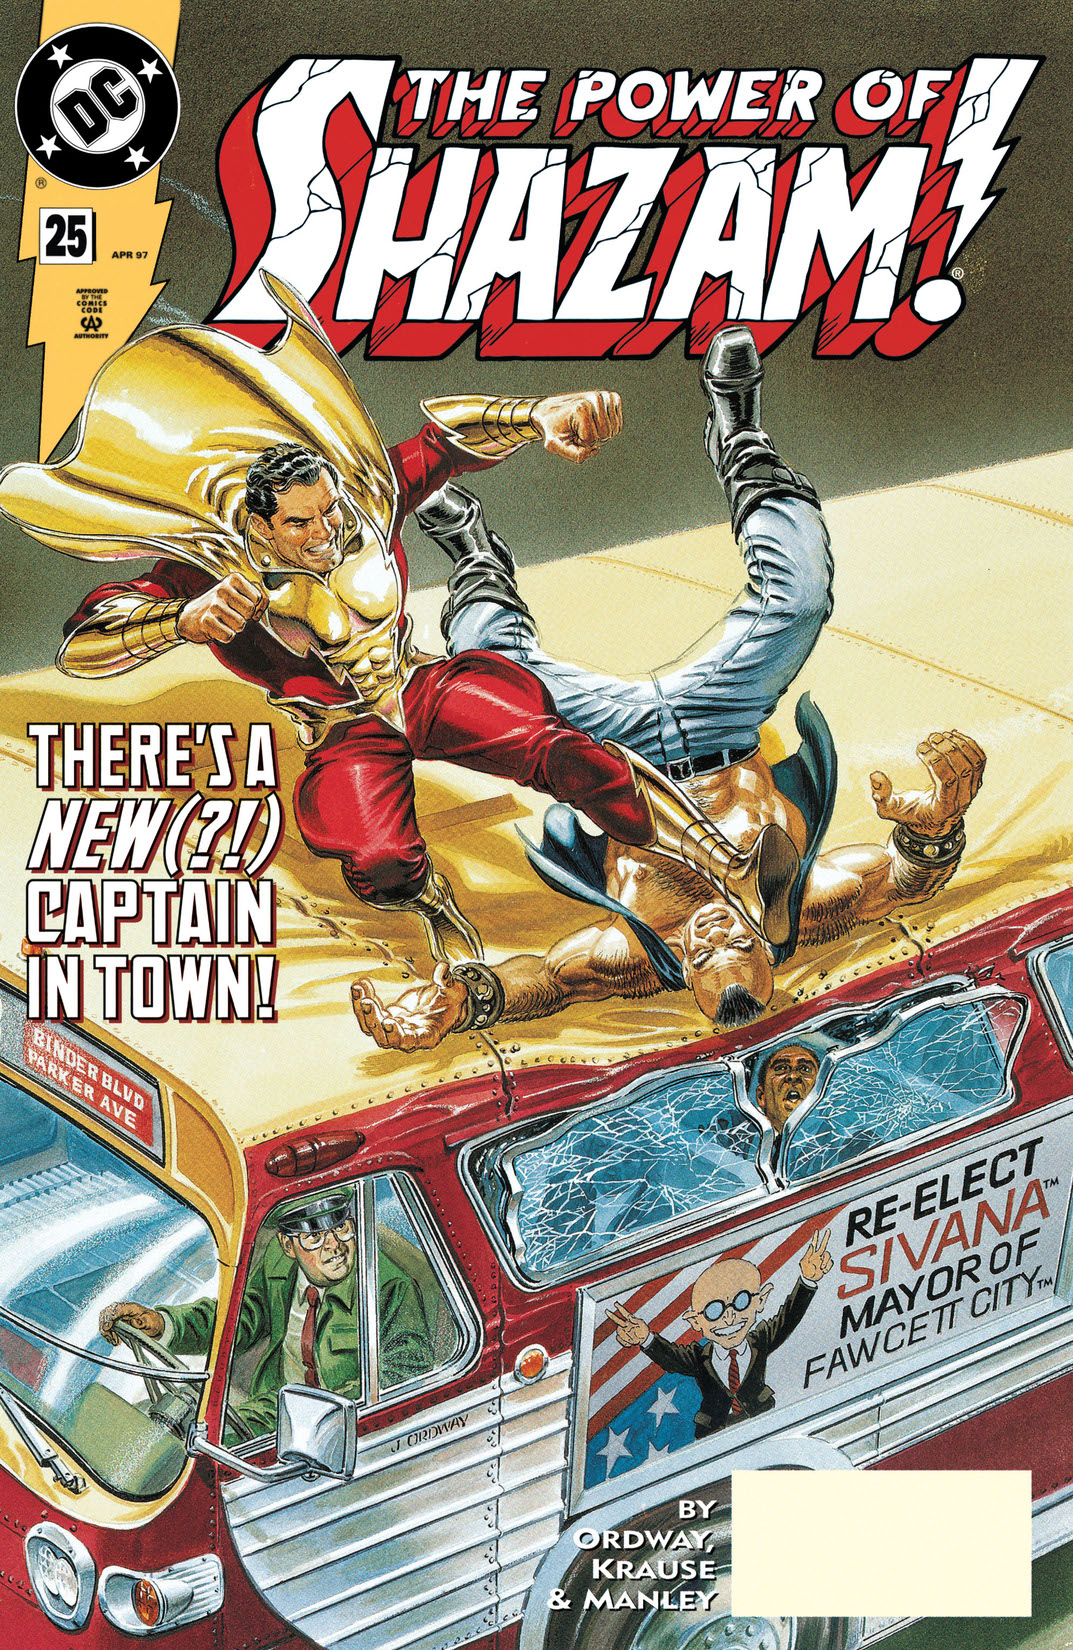 The Power of Shazam! #25 preview images